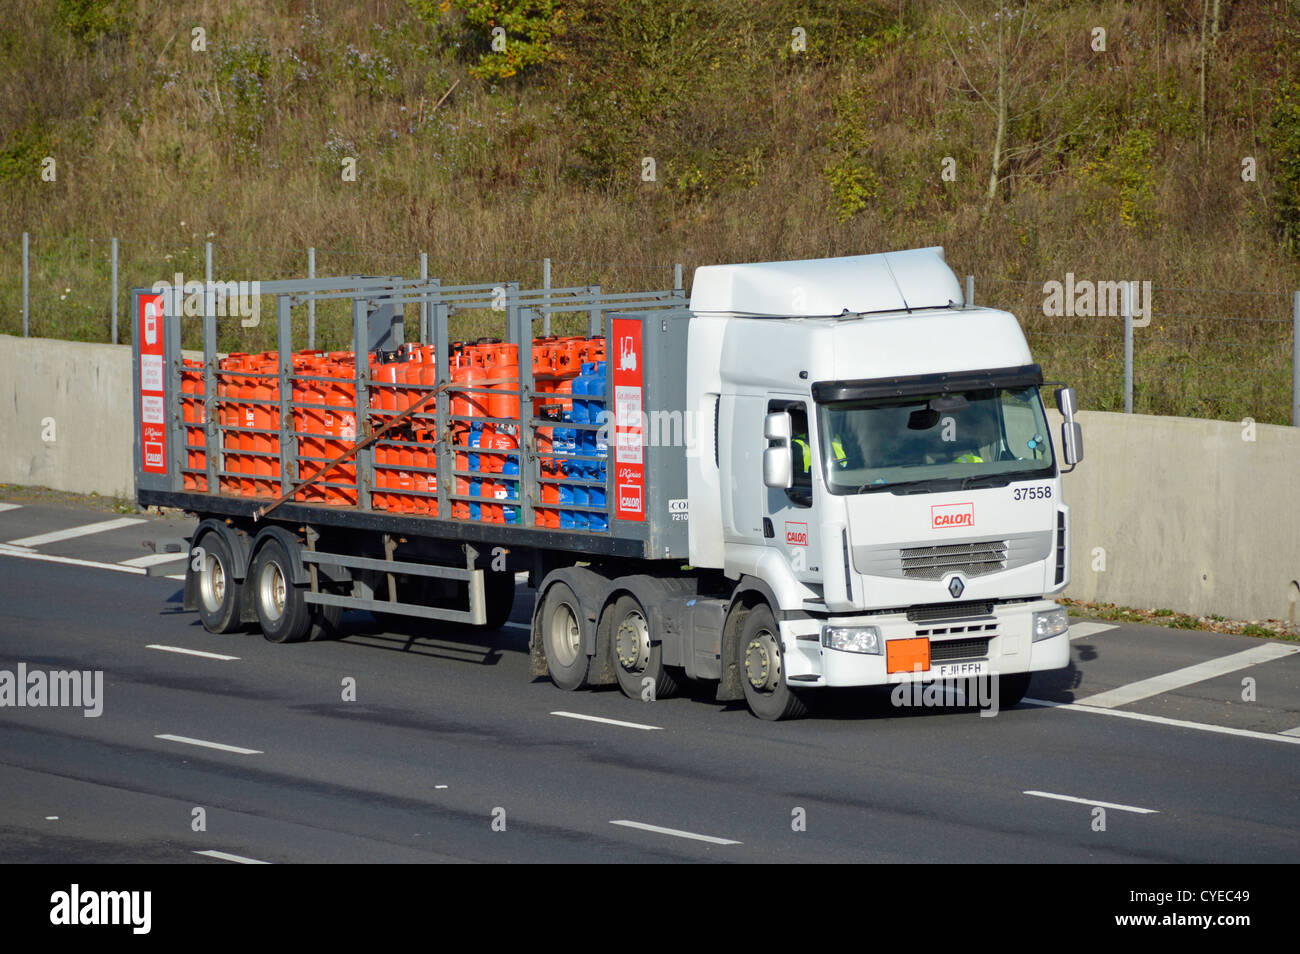 Calor lorry with trailer loaded with butane and propane gas bottles Stock Photo